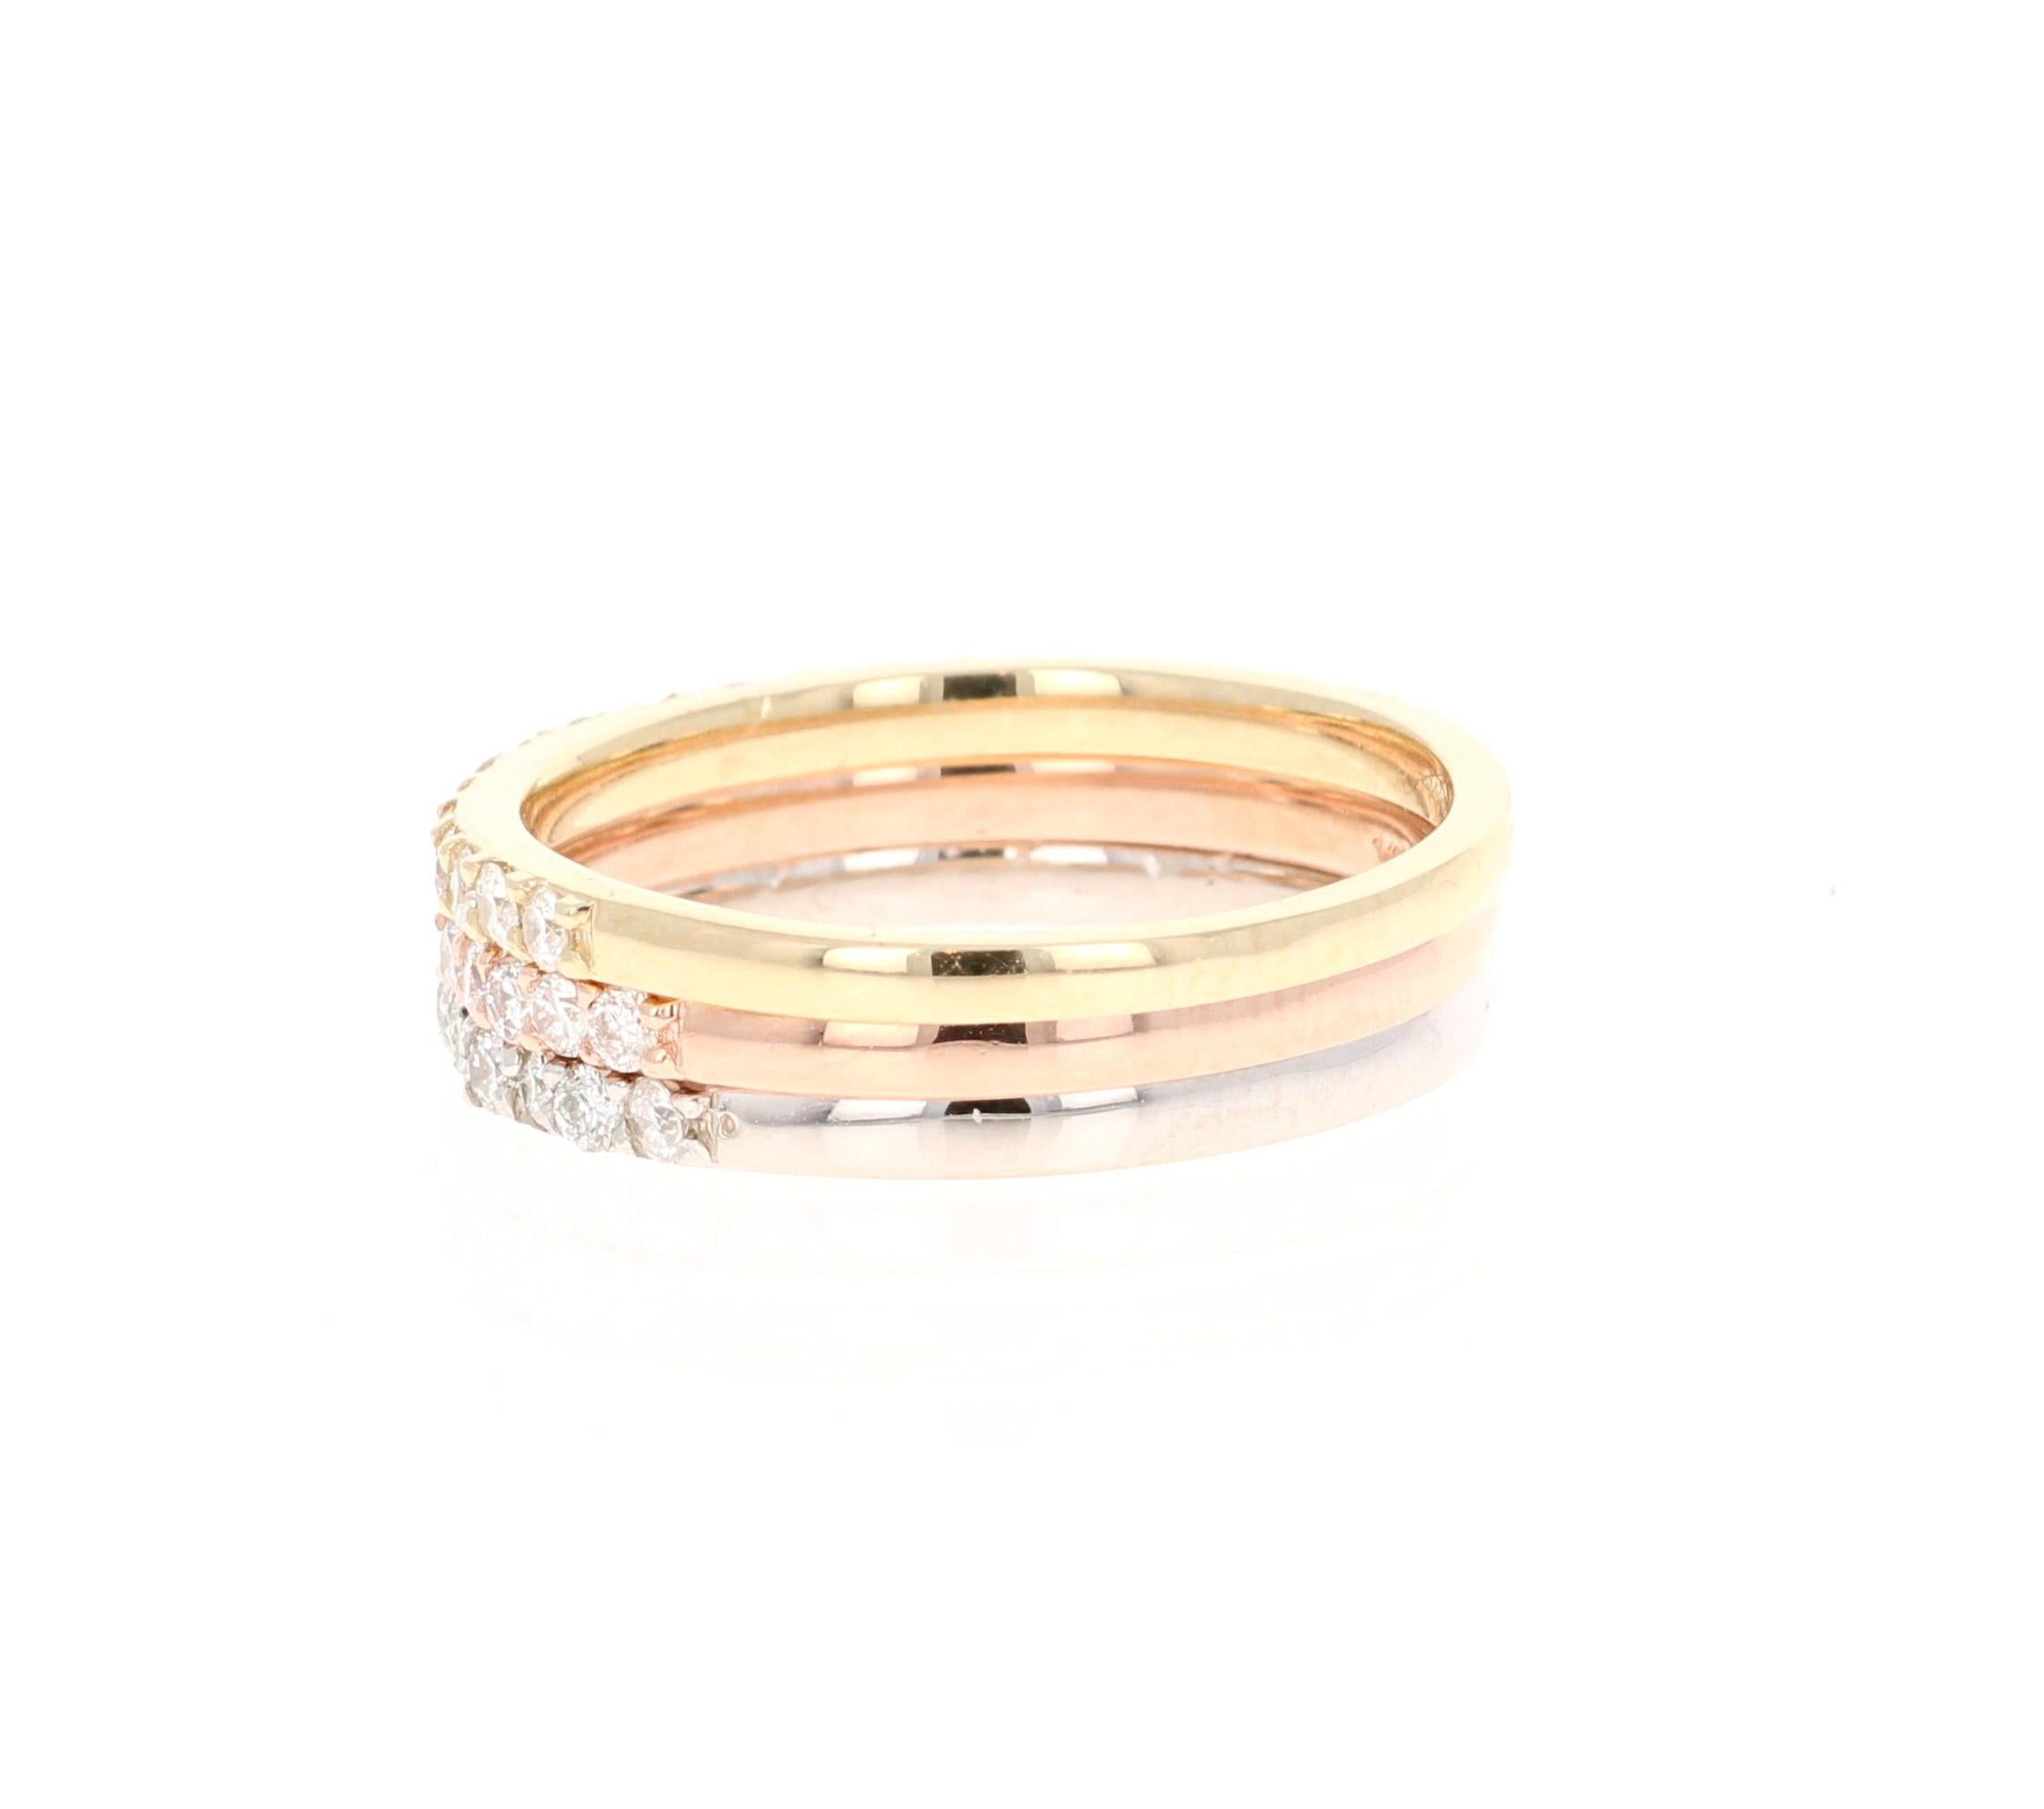 Contemporary 1.05 Round Cut Diamond White, Rose, Yellow Gold Stackable Bands